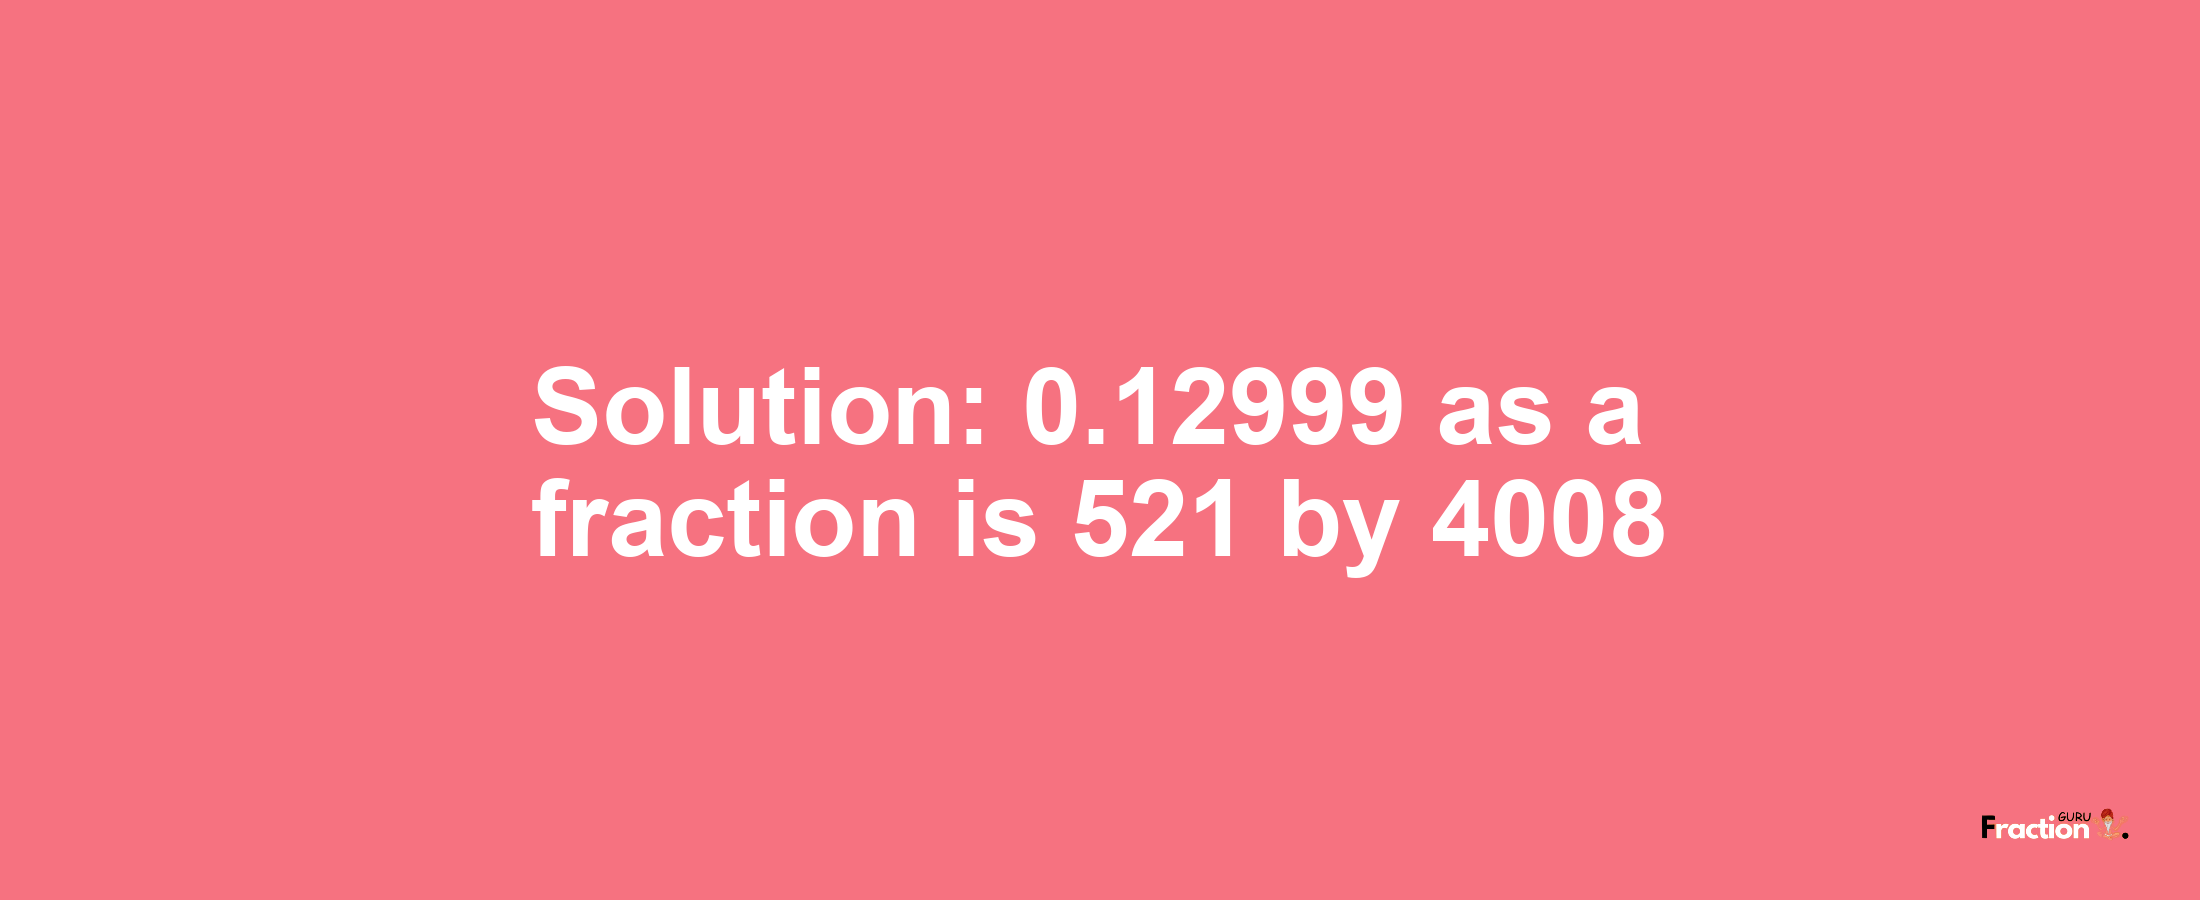 Solution:0.12999 as a fraction is 521/4008